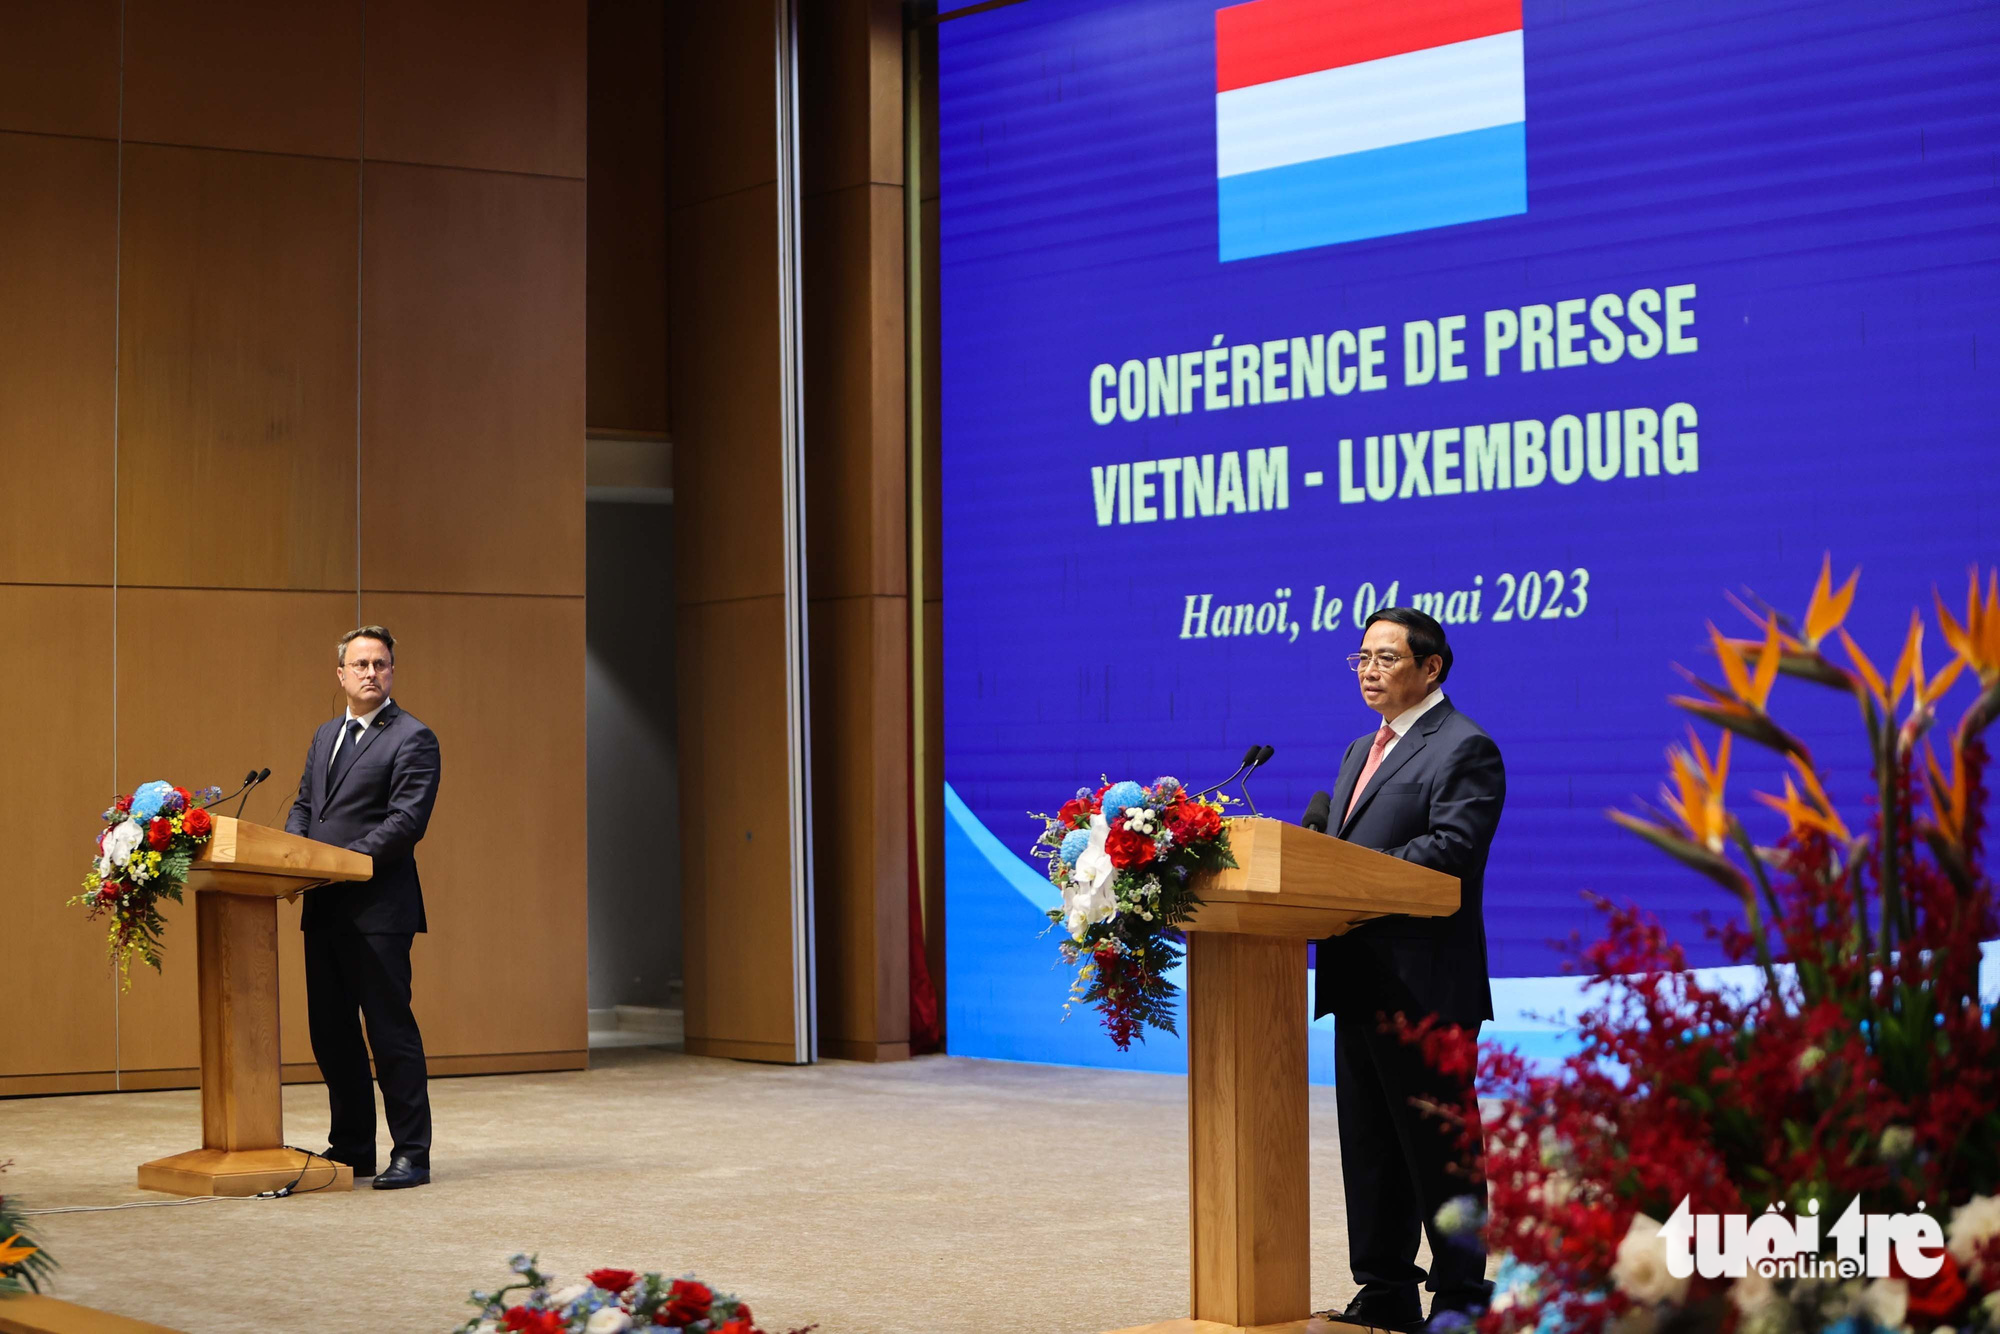 Vietnamese Prime Minister Pham Minh Chinh (R) presented some solutions to boost the cooperation between Vietnam and Luxembourg at the press conference on May 4, 2023. Photo: Nguyen Khanh / Tuoi Tre